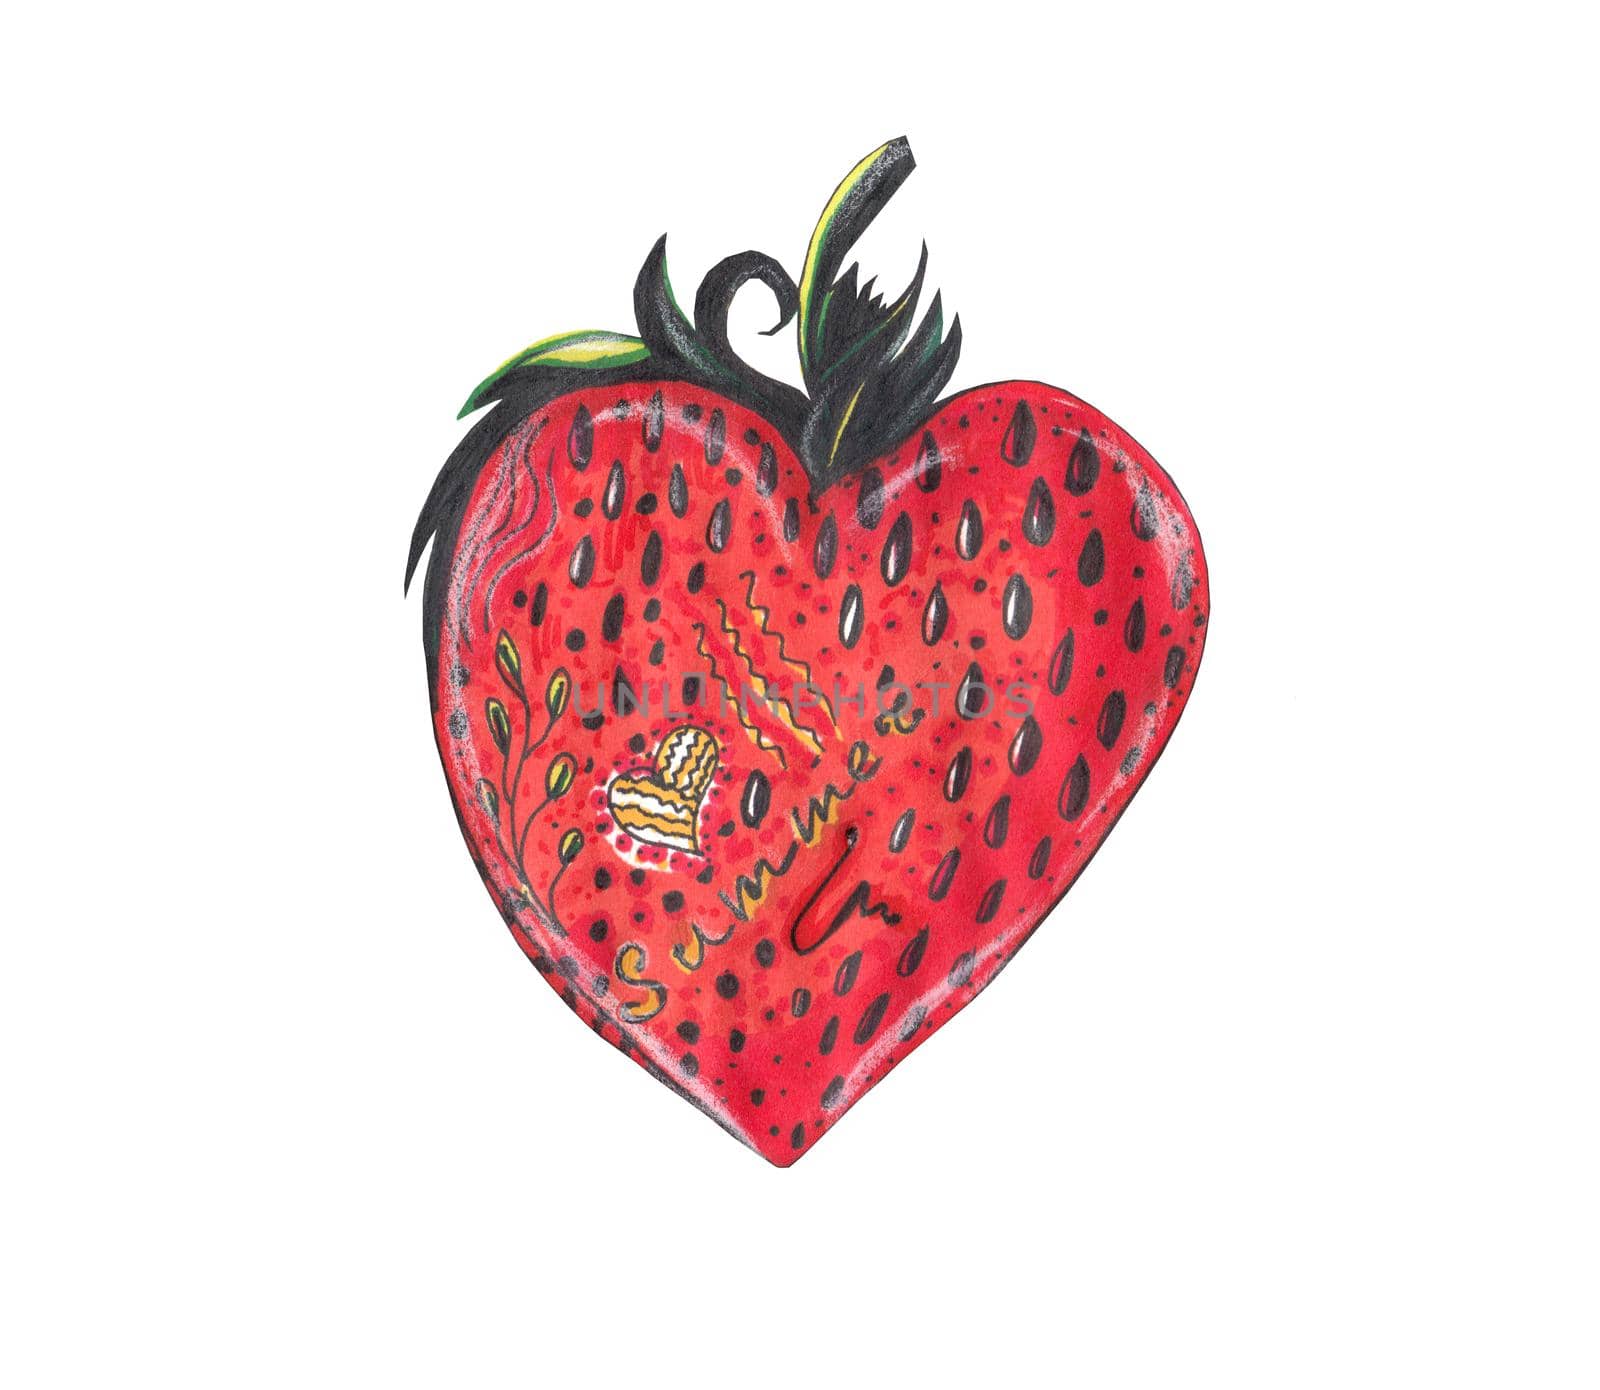 Sweet red strawberry in a heart shape with green leaves on white background. Doodle illustration. by tenny_rosehip